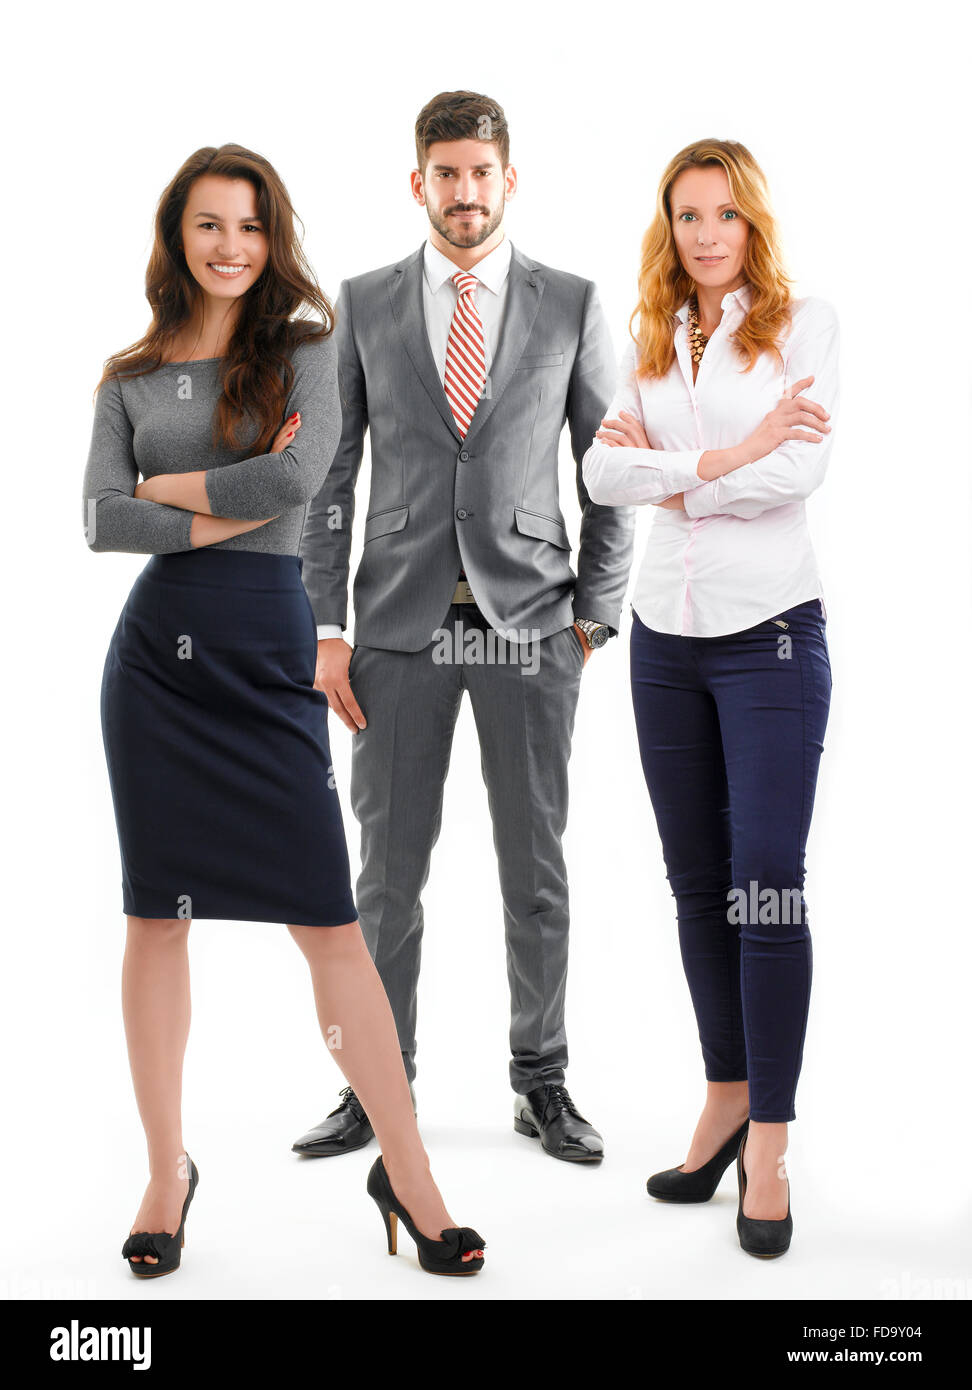 Full length portrait of successful sales team standing against white background. Stock Photo